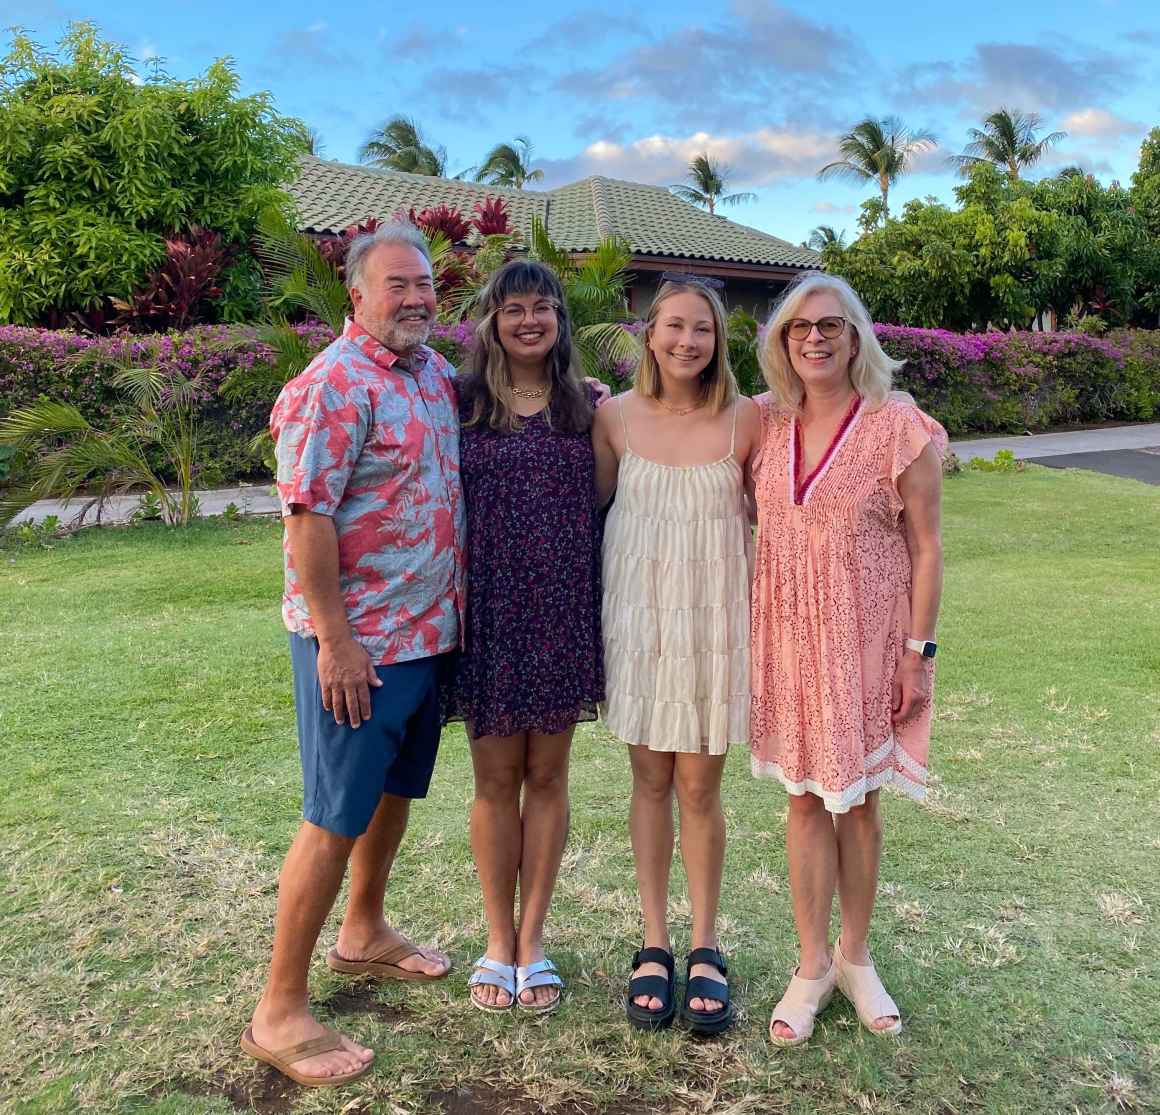 Olivia Spaccasi is standing with three family members. They are outside in Hawaii with trees, a house, and a blue sky behind them.